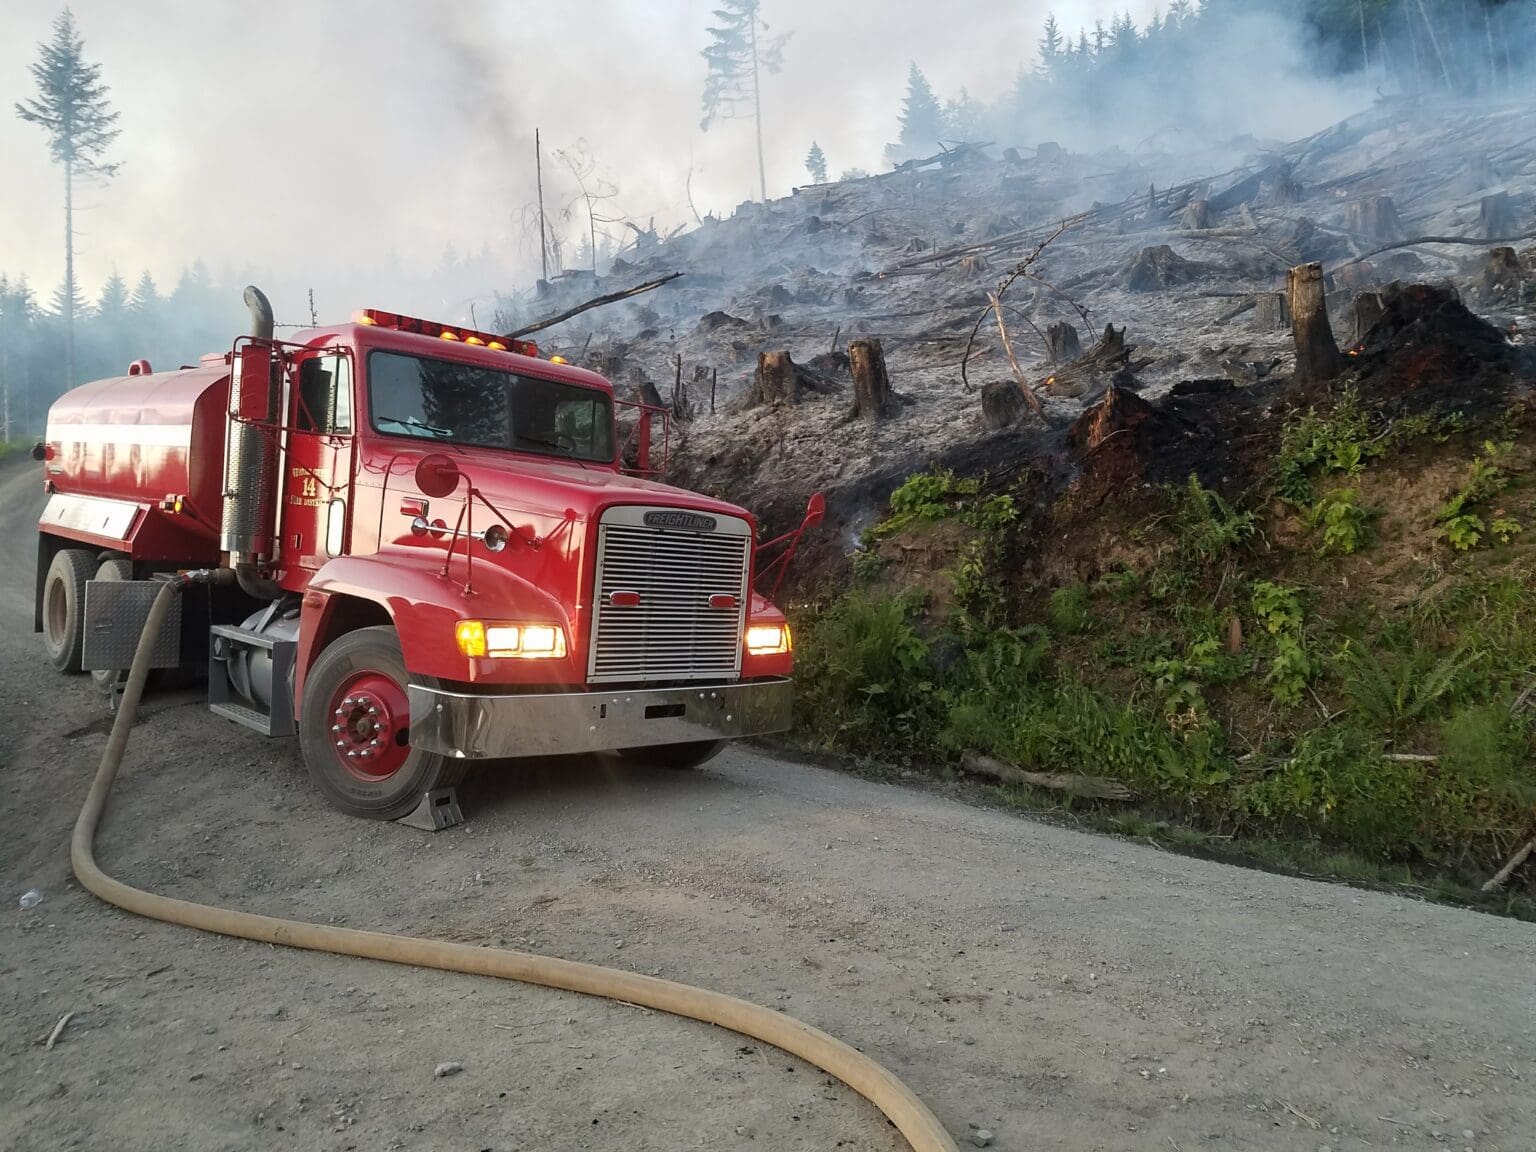 A red fire truck parked next to a burned down forest.